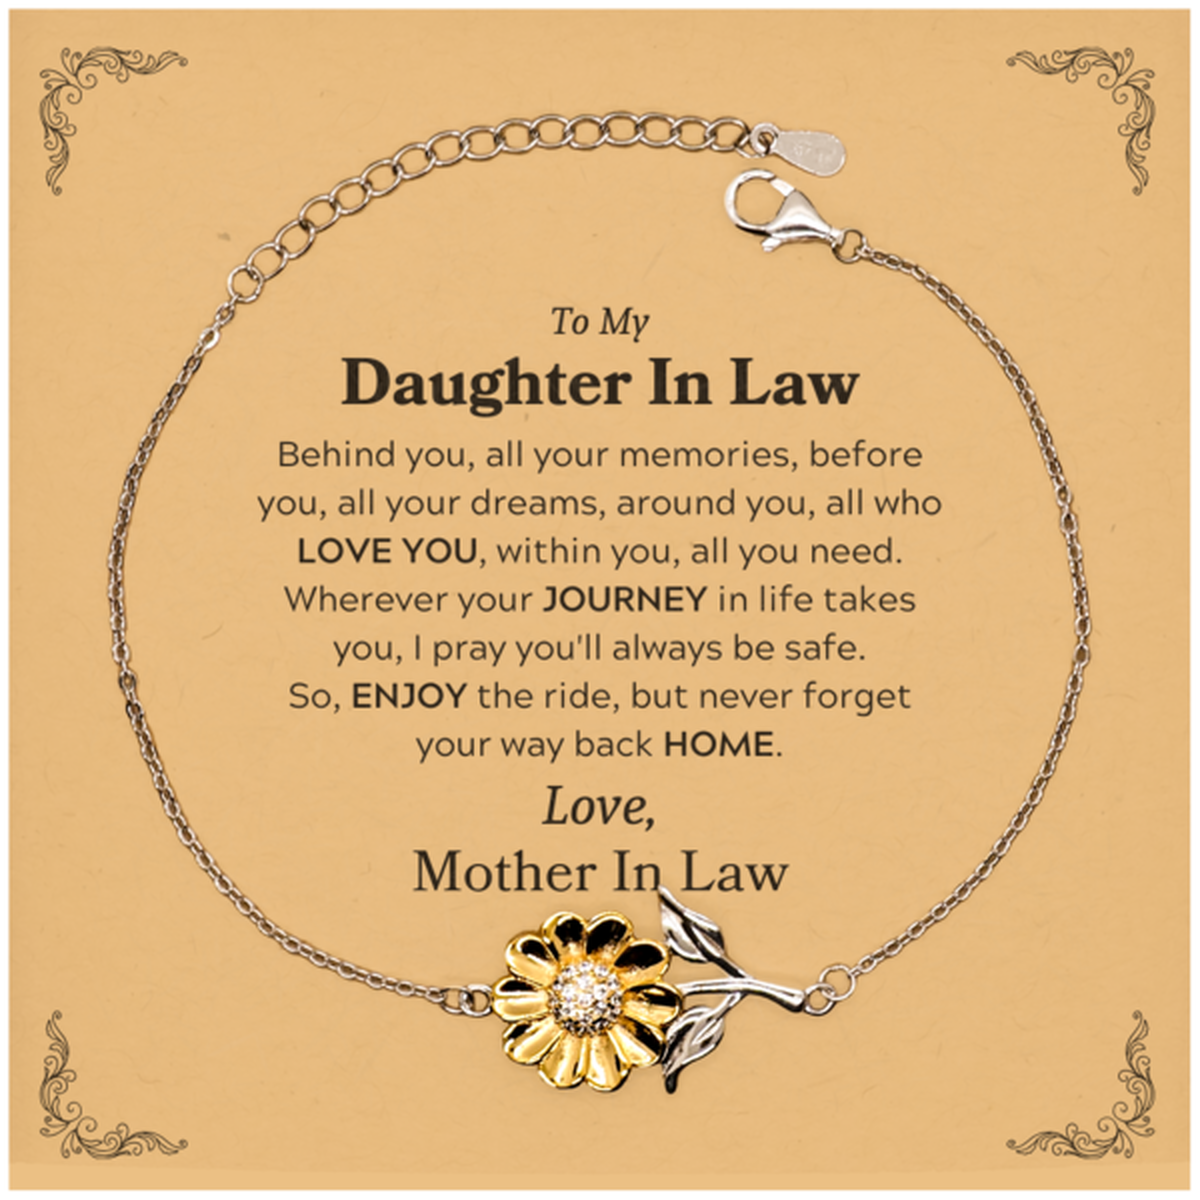 To My Daughter In Law Graduation Gifts from Mother In Law, Daughter In Law Sunflower Bracelet Christmas Birthday Gifts for Daughter In Law Behind you, all your memories, before you, all your dreams. Love, Mother In Law